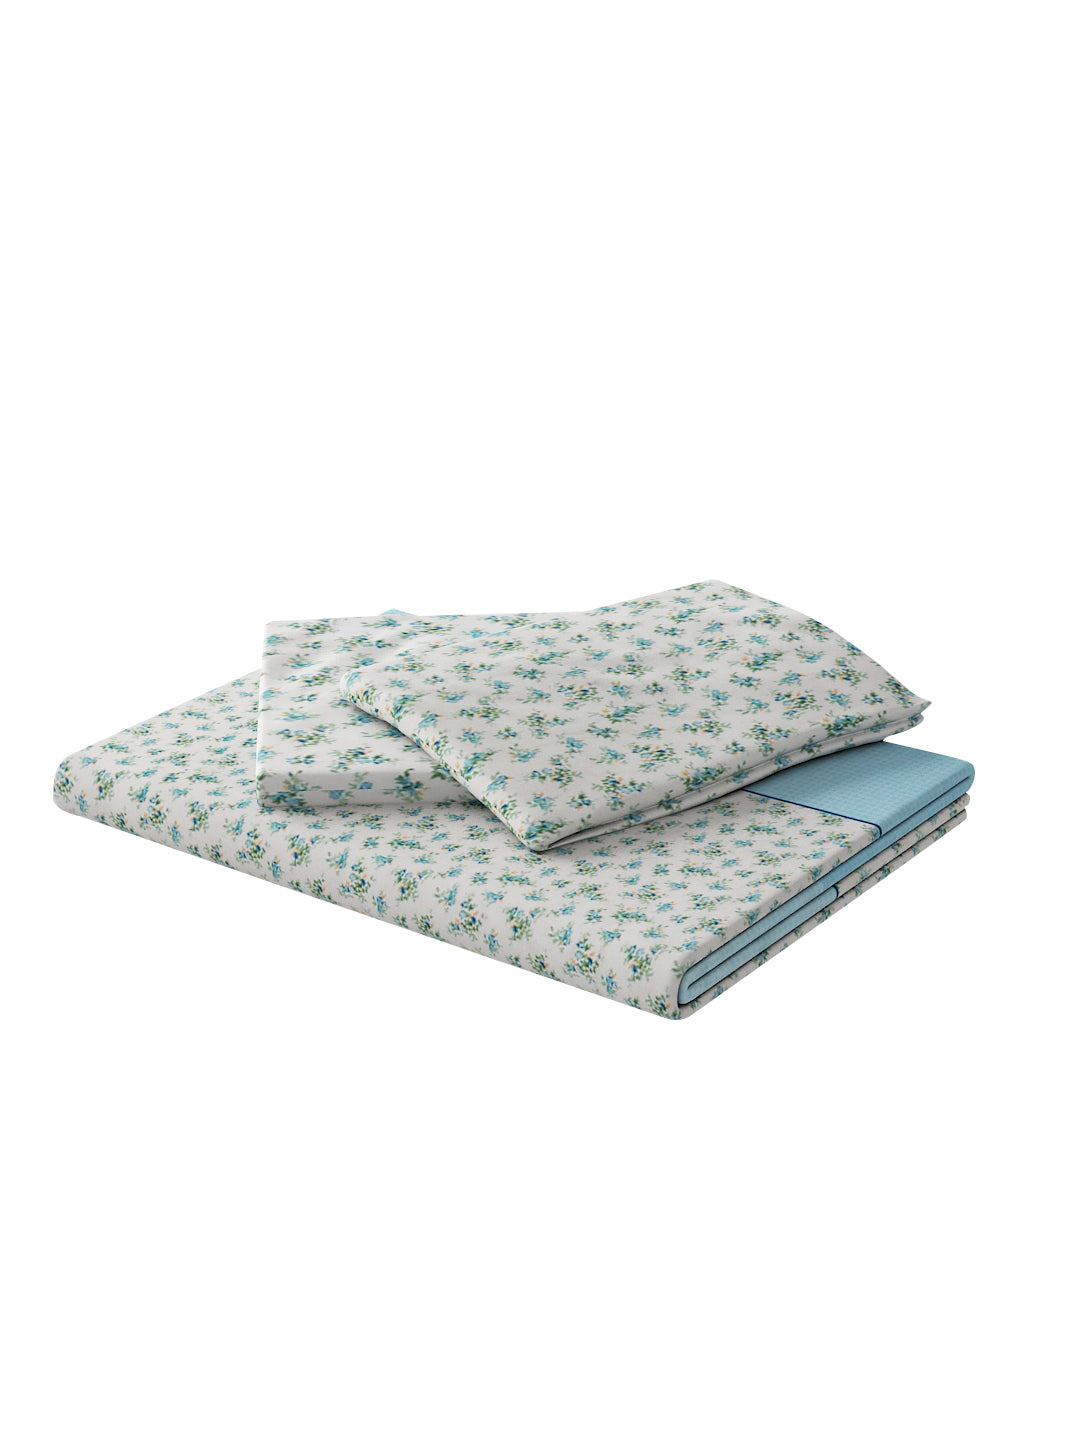 180 TC Double Bed Cotton Bedsheet with 2 Pillow Covers-Multicolor Blue